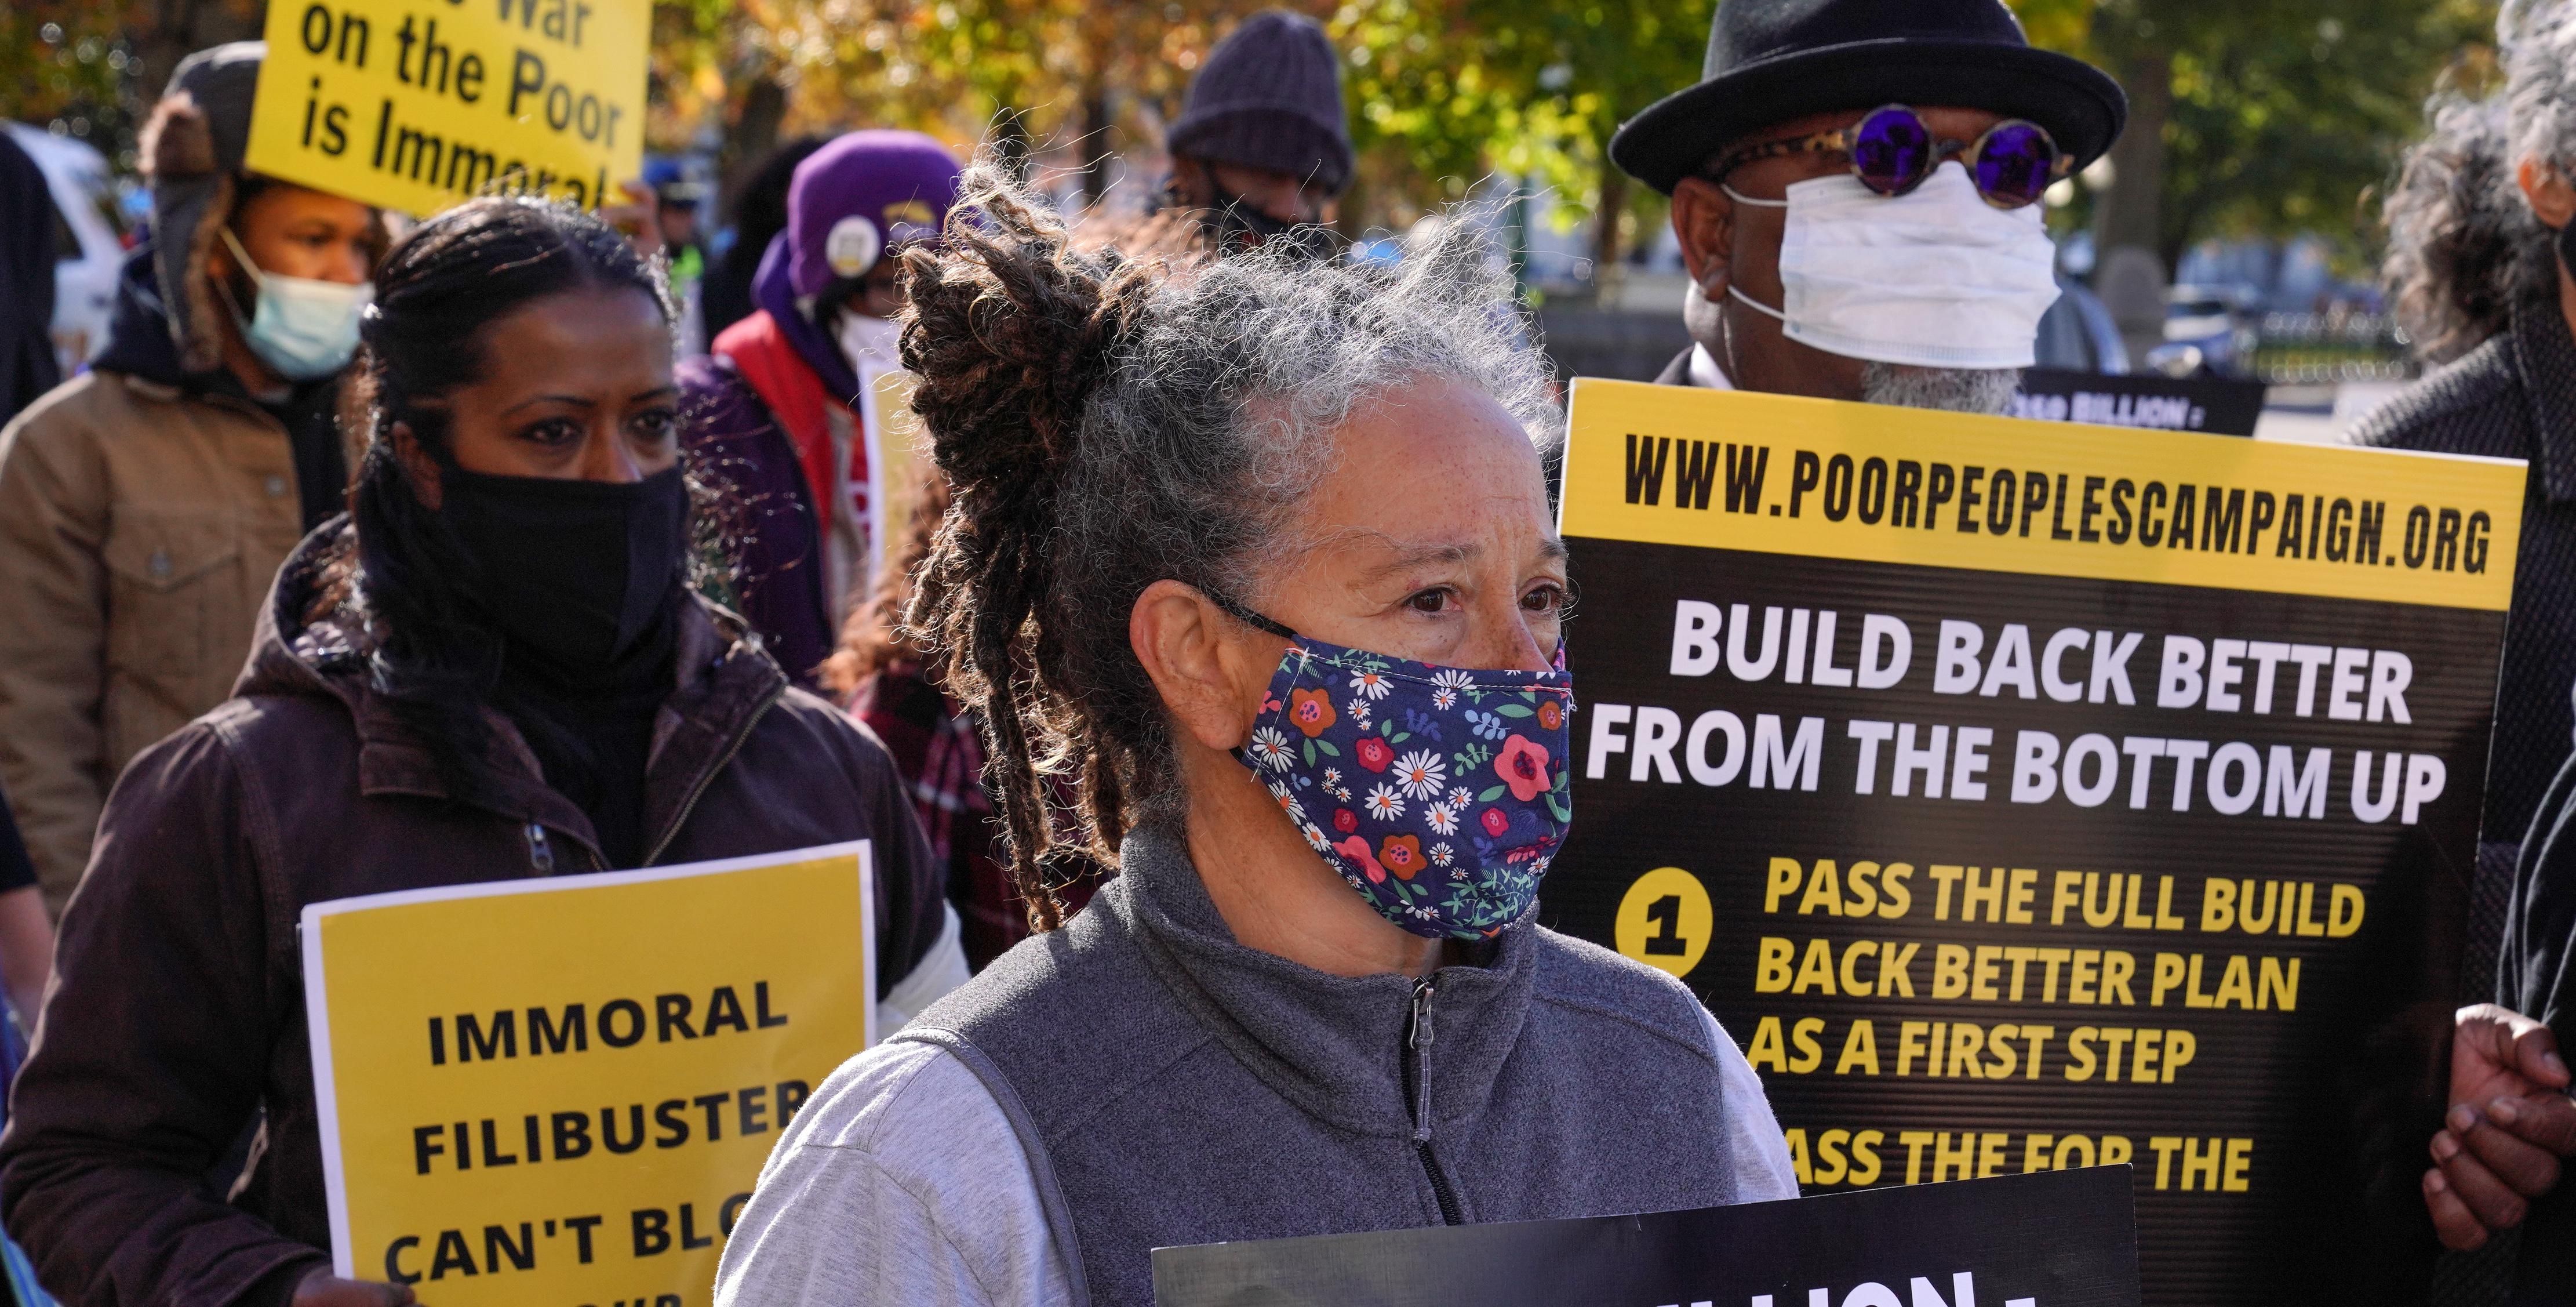 Activists with the Poor People's Campaign march in Washington, D.C.